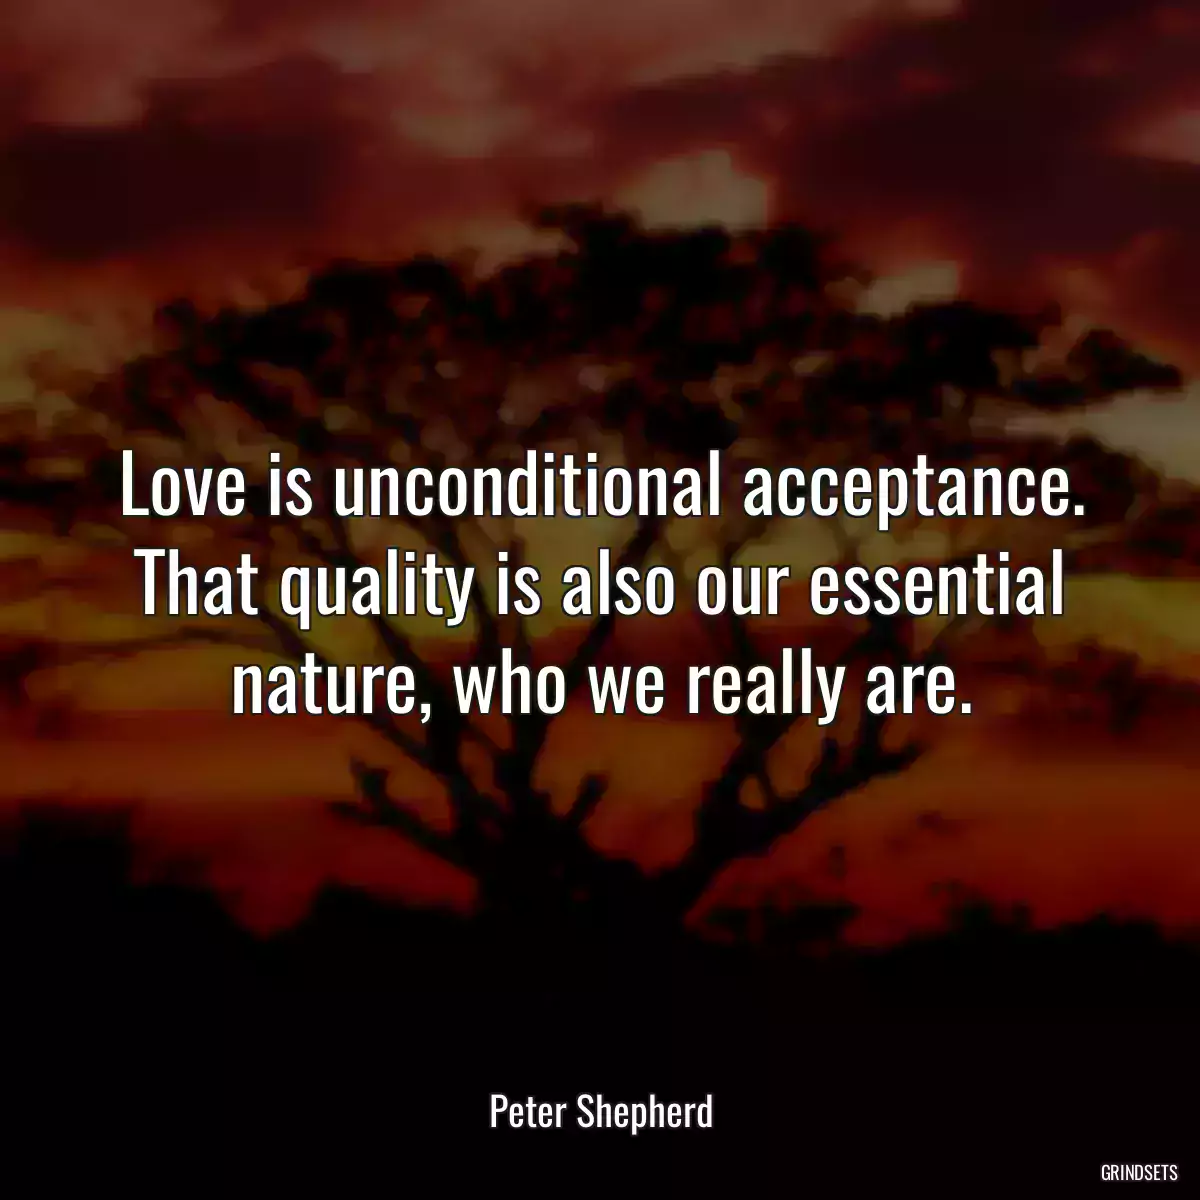 Love is unconditional acceptance. That quality is also our essential nature, who we really are.